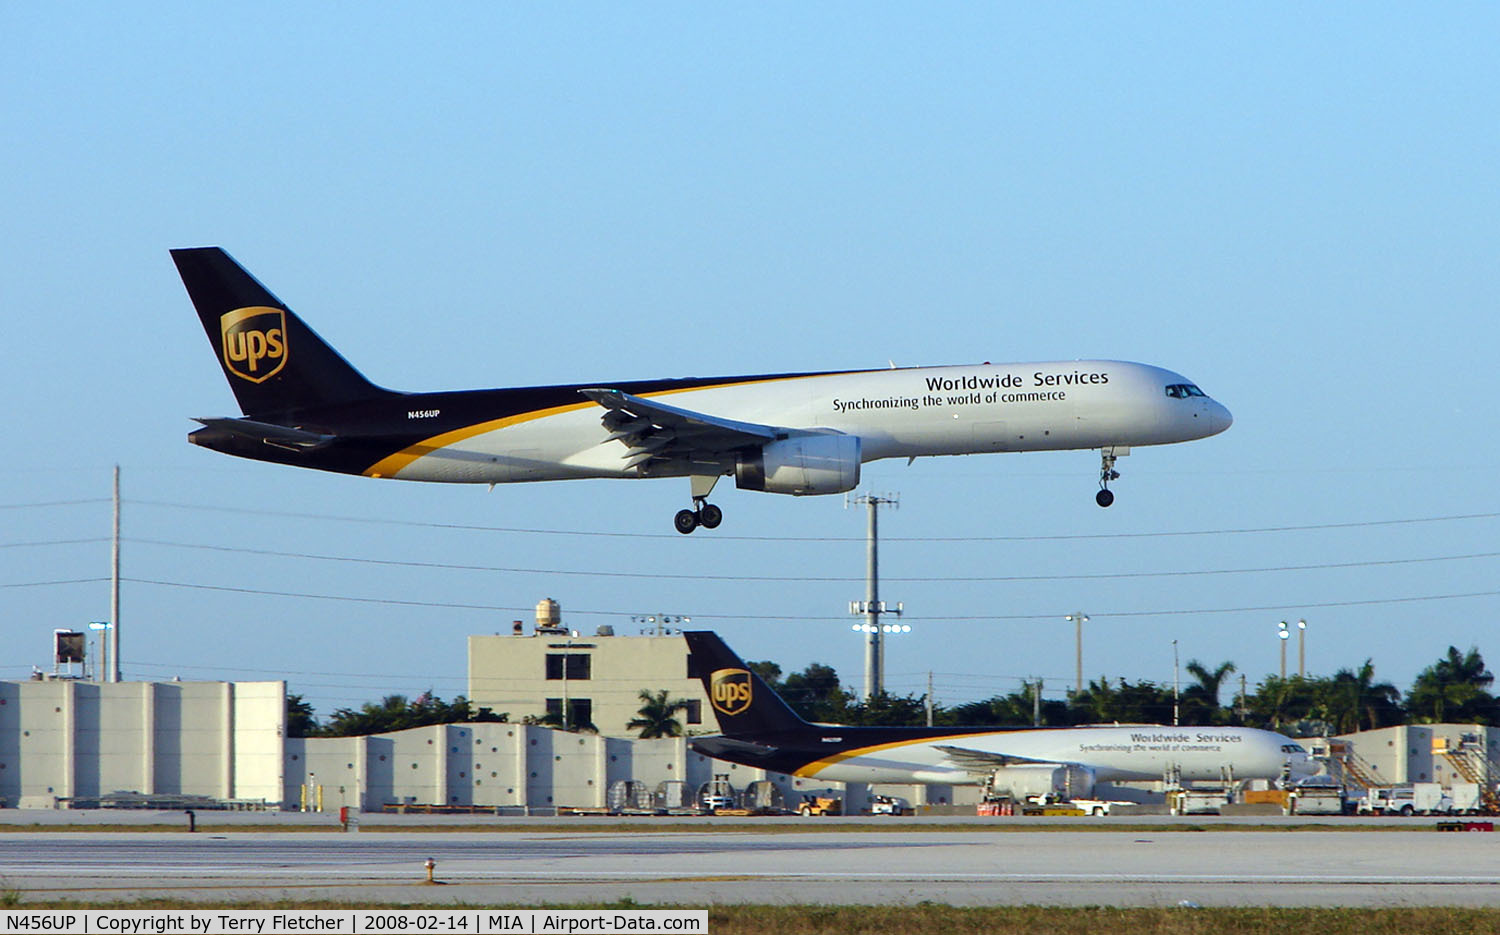 N456UP, 1996 Boeing 757-24APF C/N 25477, UPS B757 about to touchdown adjacent its home ramp at Miami